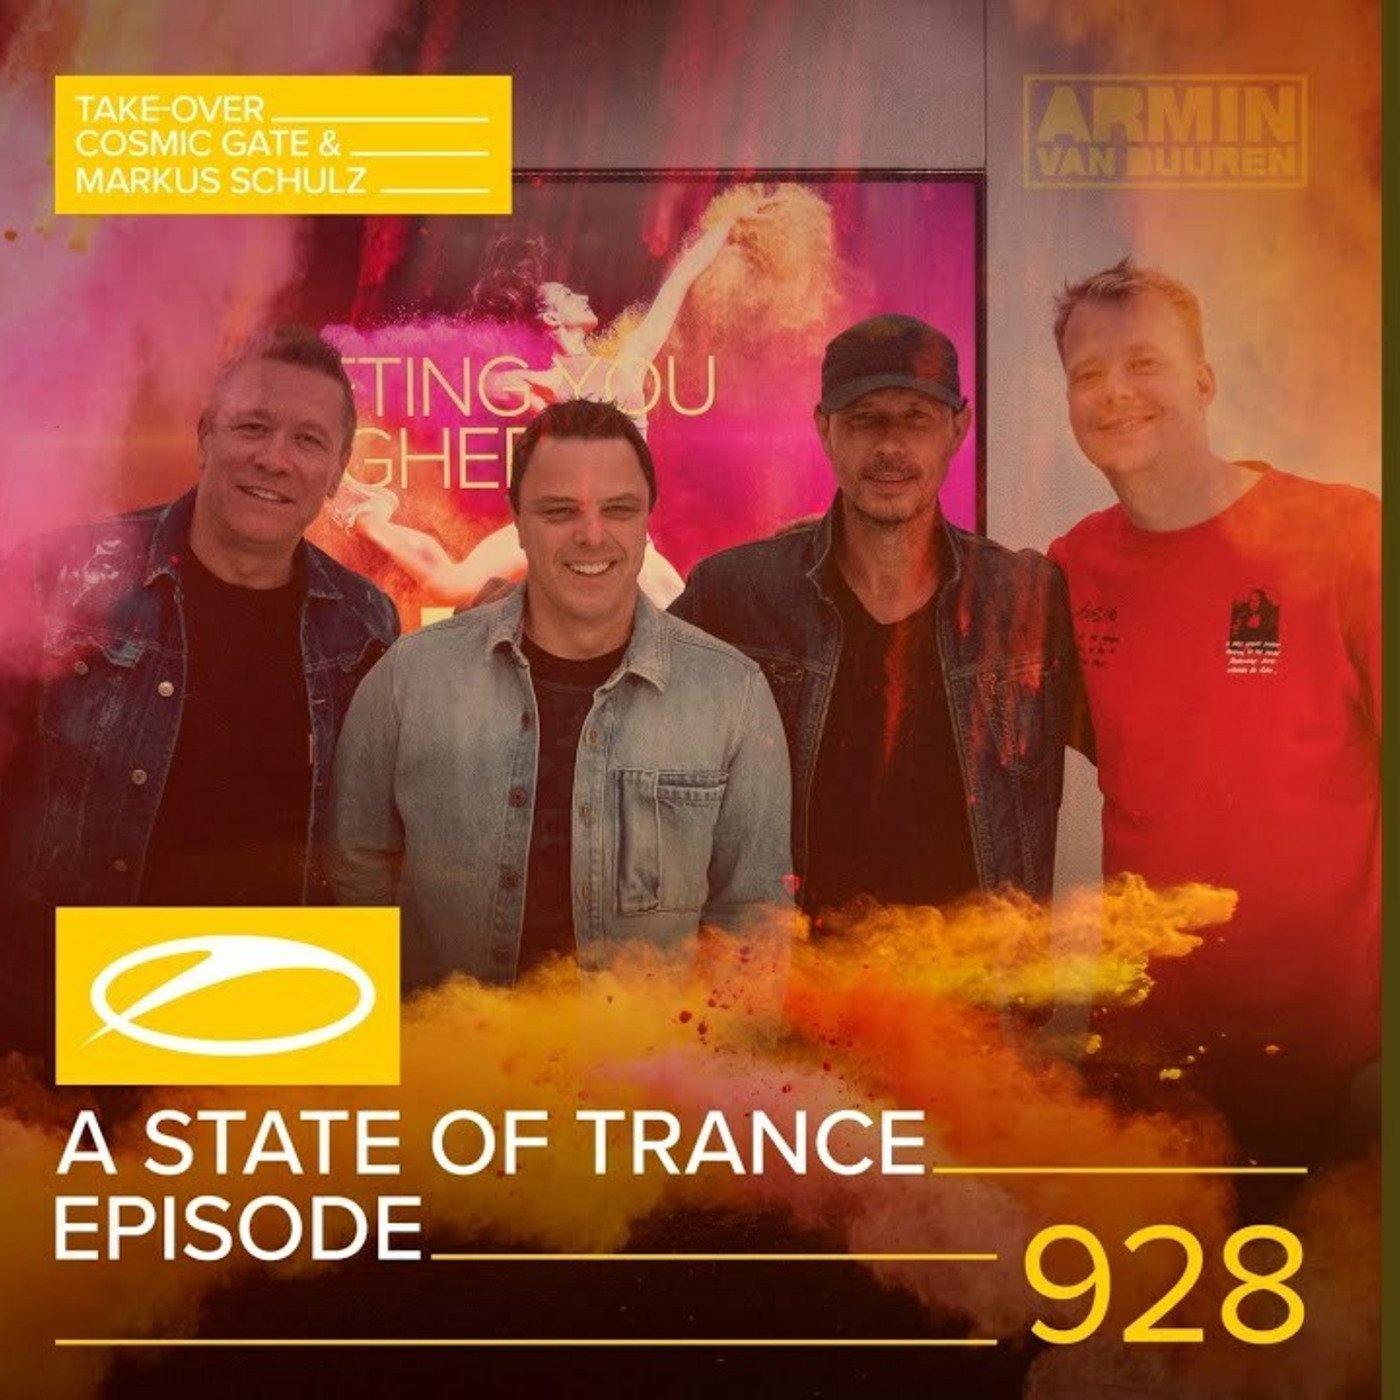 Armin van Buuren - A State Of Trance Episode 928 (Hosted by Cosmic Gate & Markus Schulz) [22.08.2019]